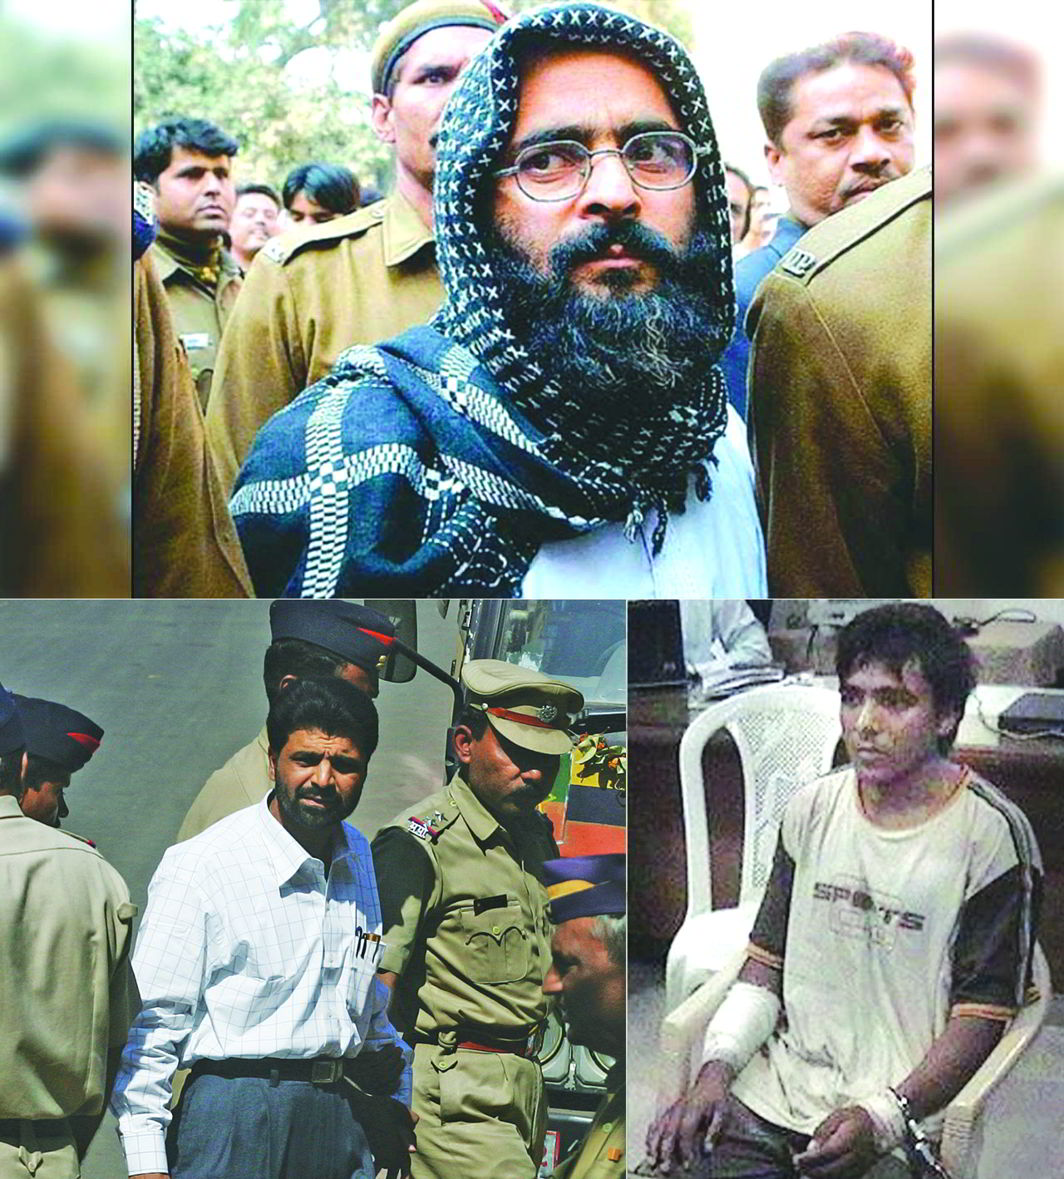 (Clockwise from far left) Afzal Guru, Ajmal Kasab and Yakub Memon have been hanged to death in the last few years for perpetrating terror in the country